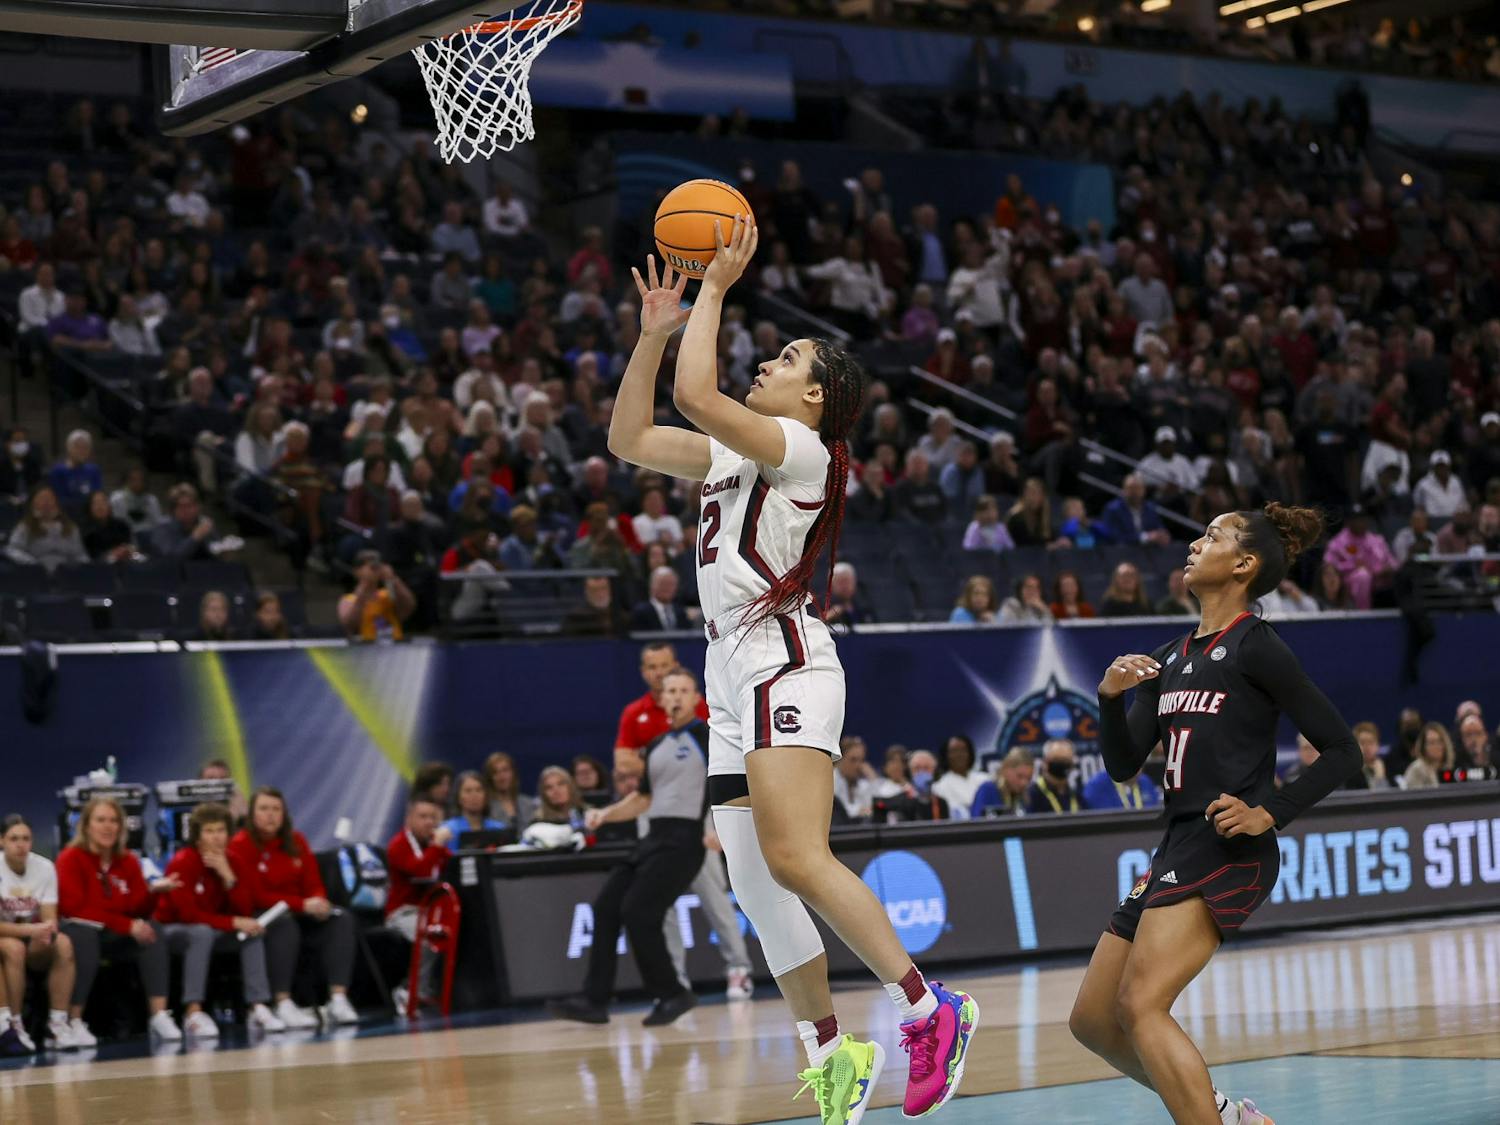 Junior guard Brea Beal goes for a layup during the second quarter of South Carolina's 72-59 victory over Louisville on April 1, 2022, advancing to the National Championship game.